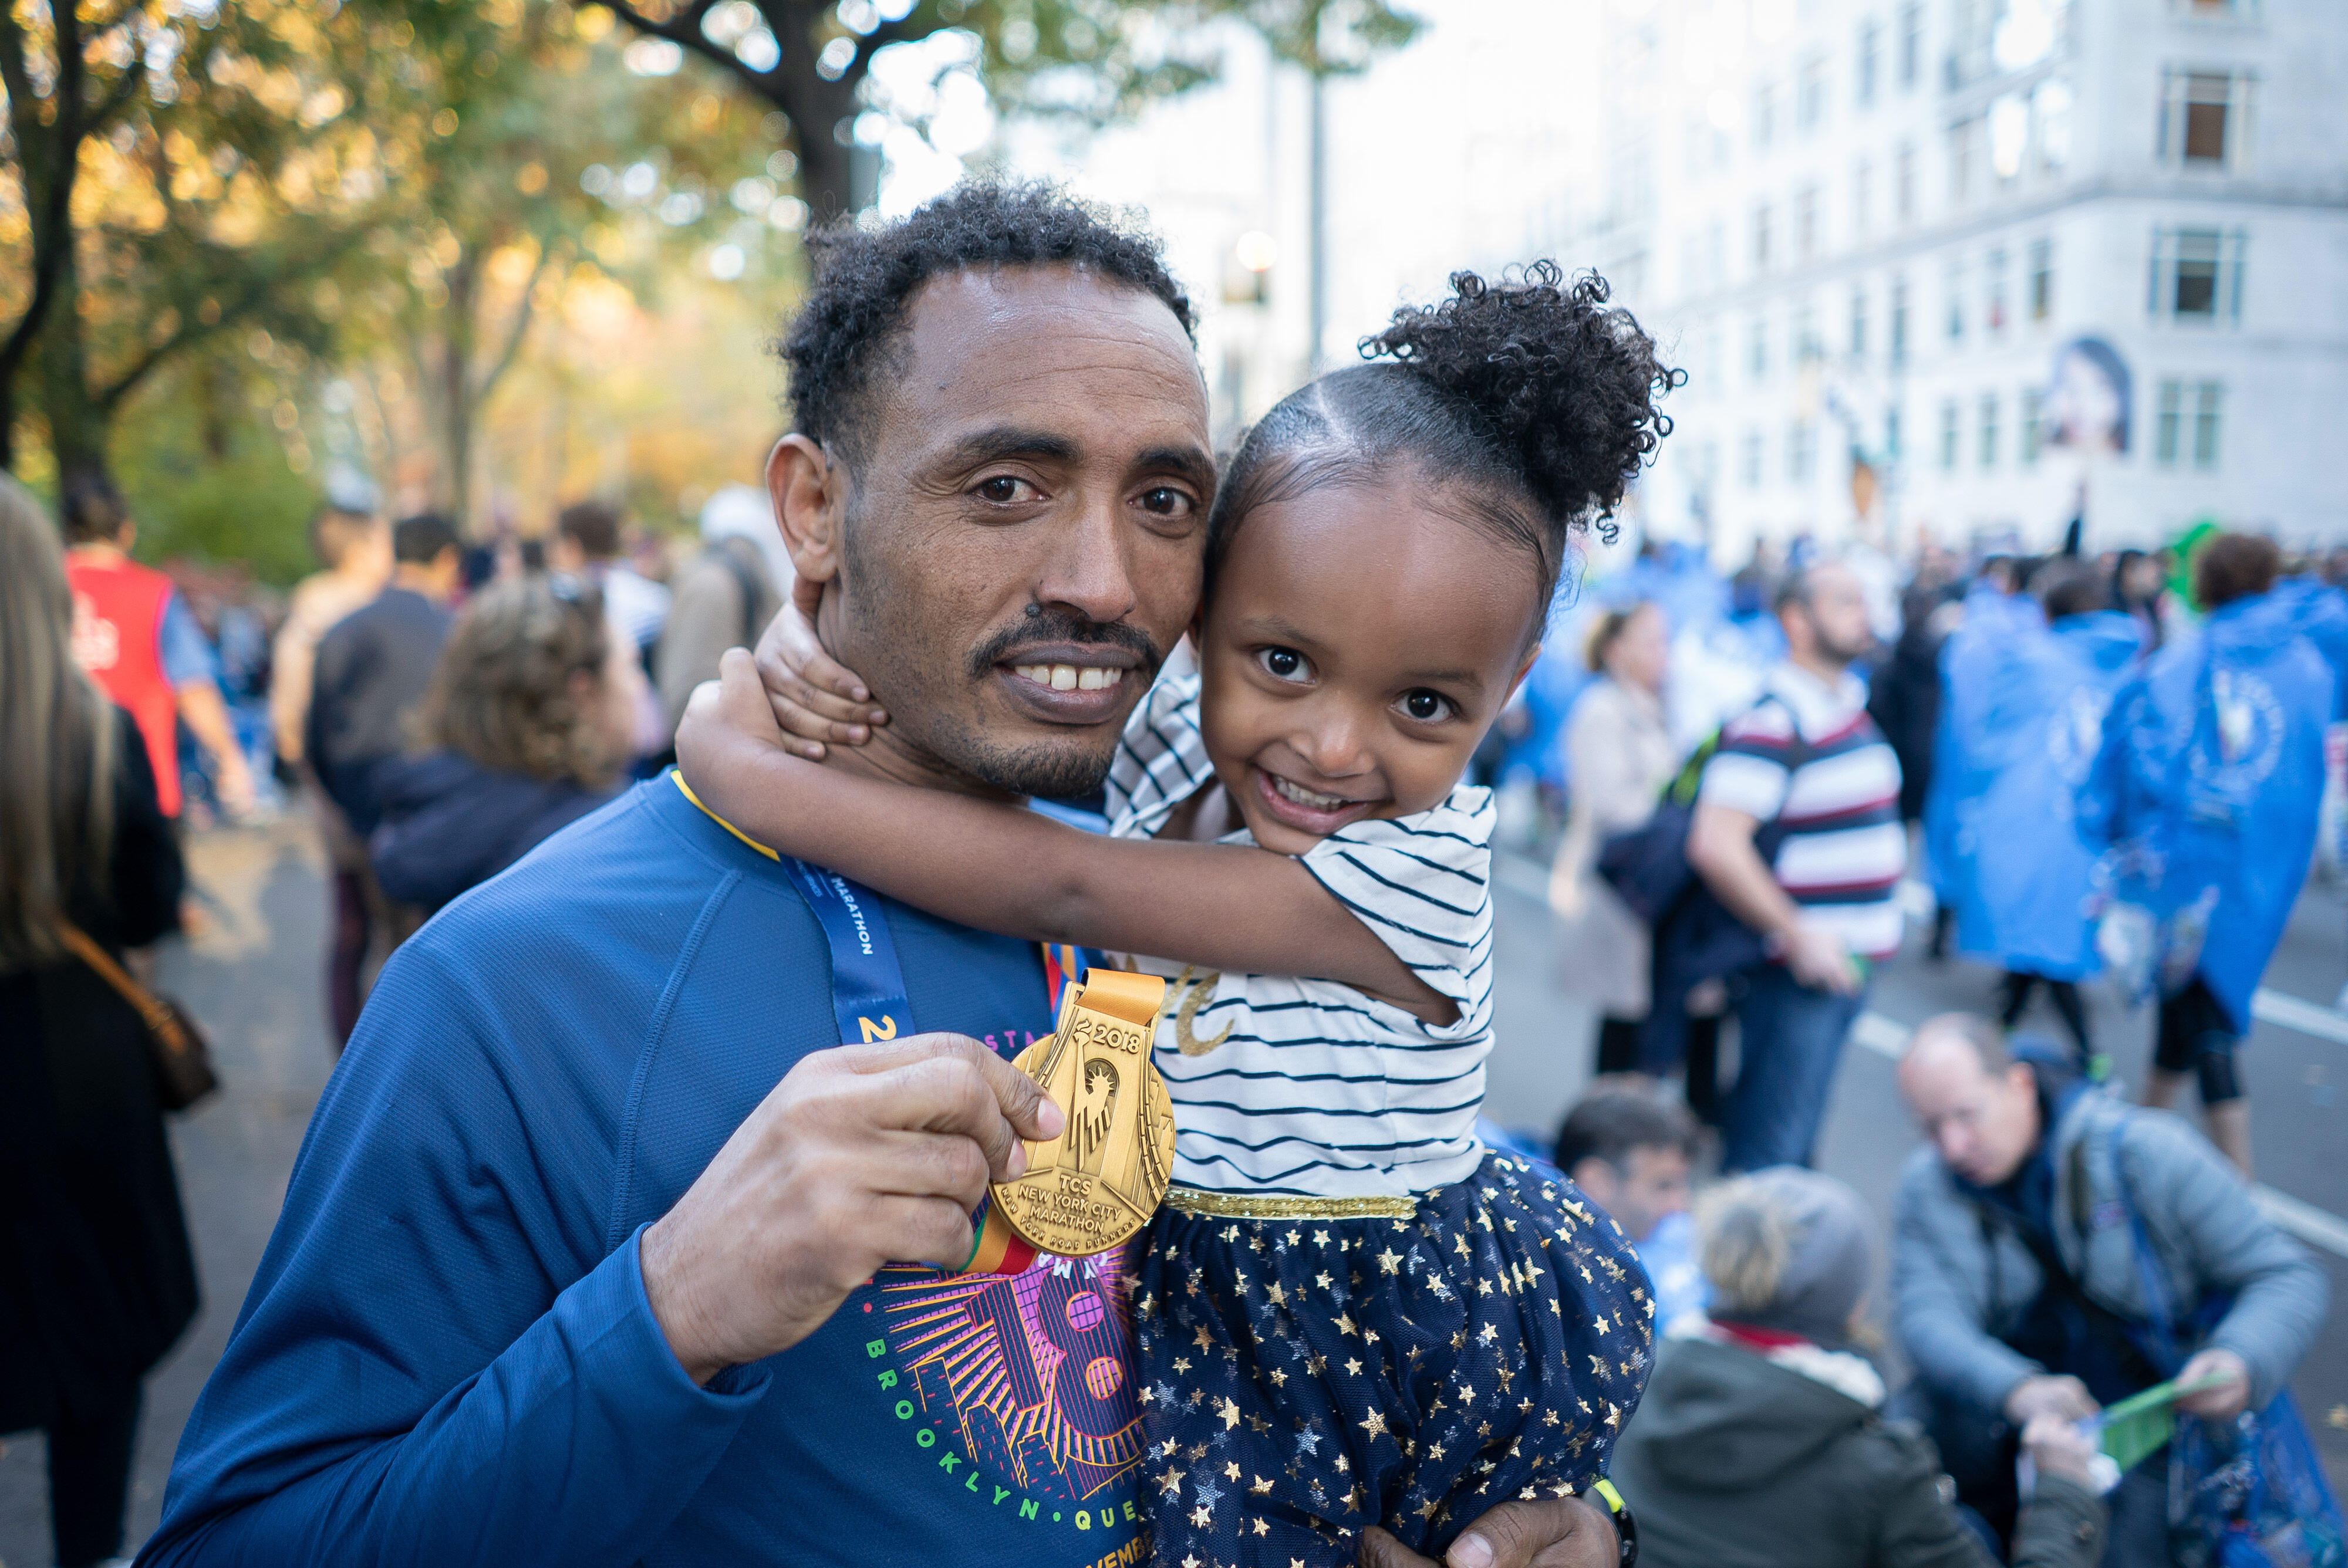 Ethiopian runner Tolassa Elemaa holds his daughter after completing the New York City Marathon on Nov. 7, 2018